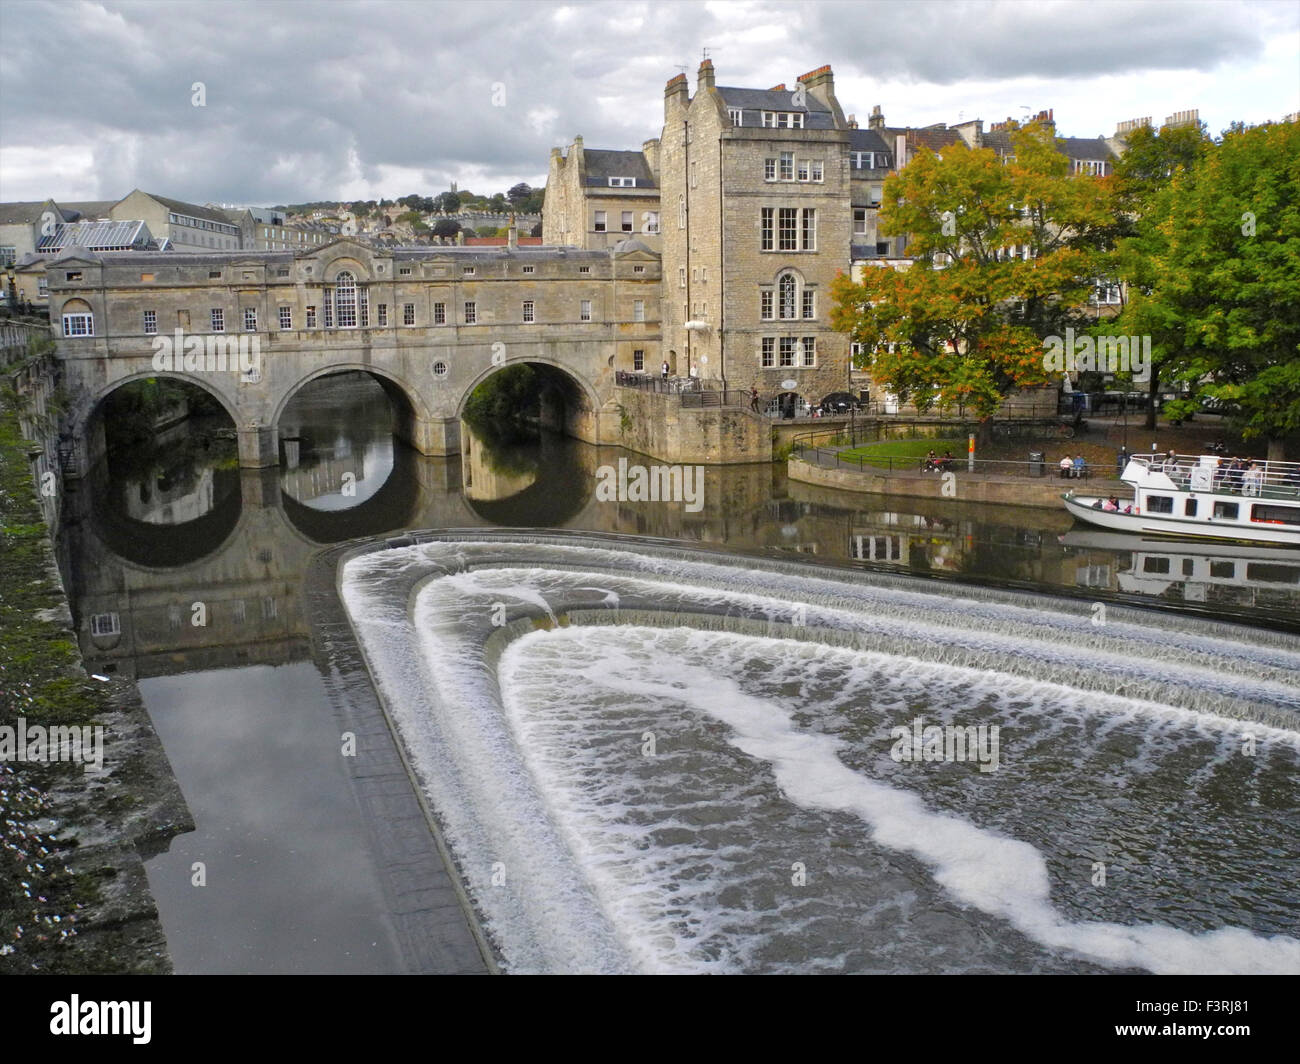 Georgian Pulteney Bridge beyond Pulteney Weir in Bath (which was constructed in 1971 to solve the chronic flooding by the River Avon). Stock Photo